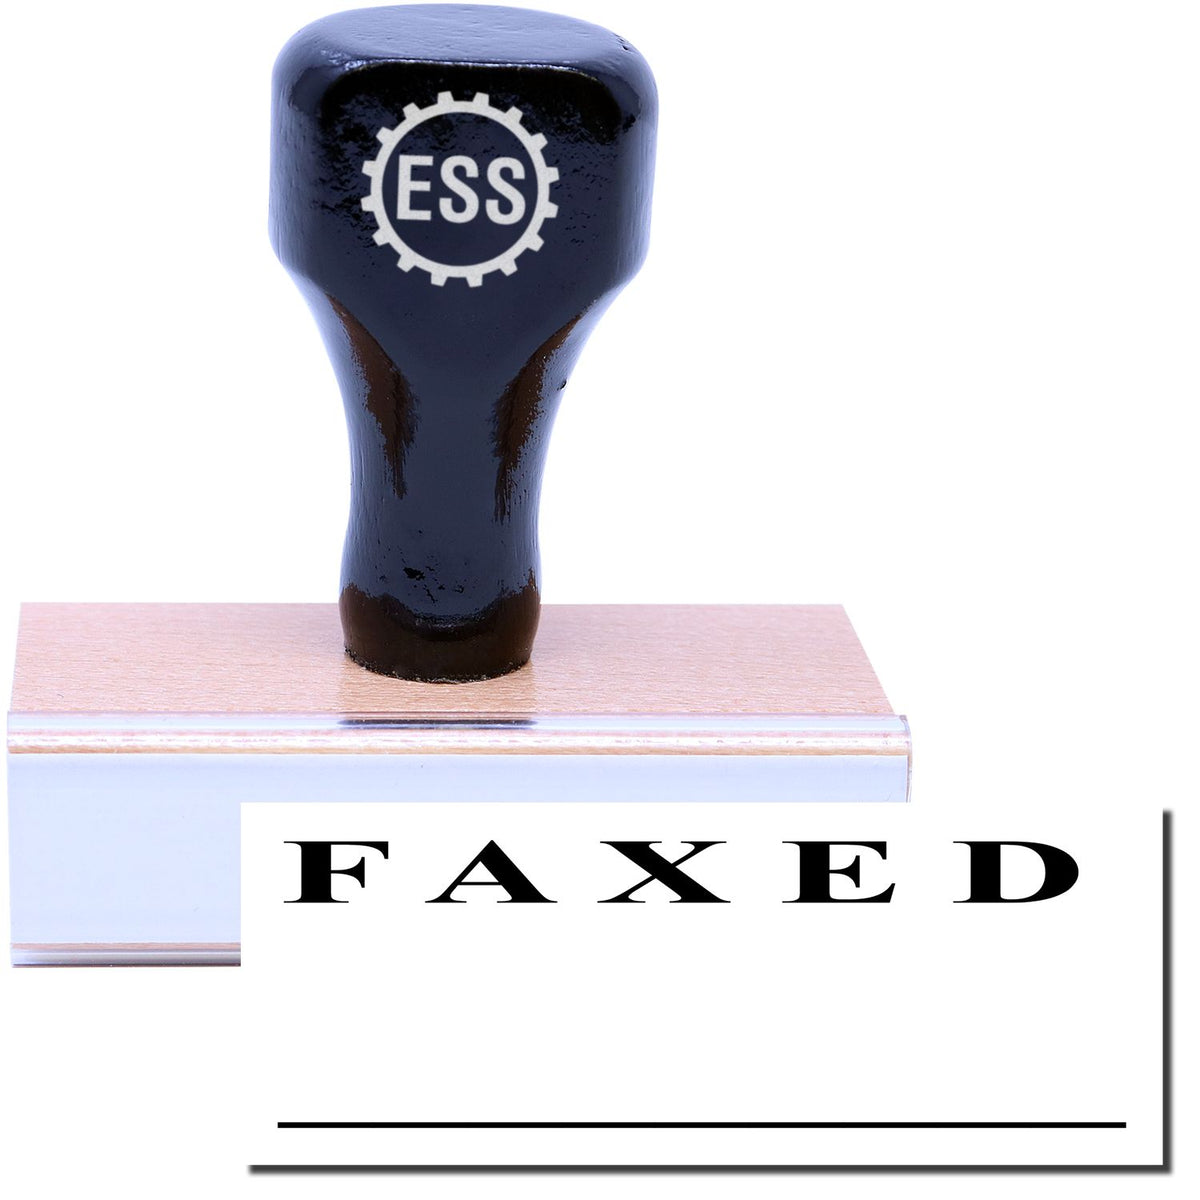 A stock office rubber stamp with a stamped image showing how the text &quot;FAXED&quot; in a two-lined large font is displayed after stamping.